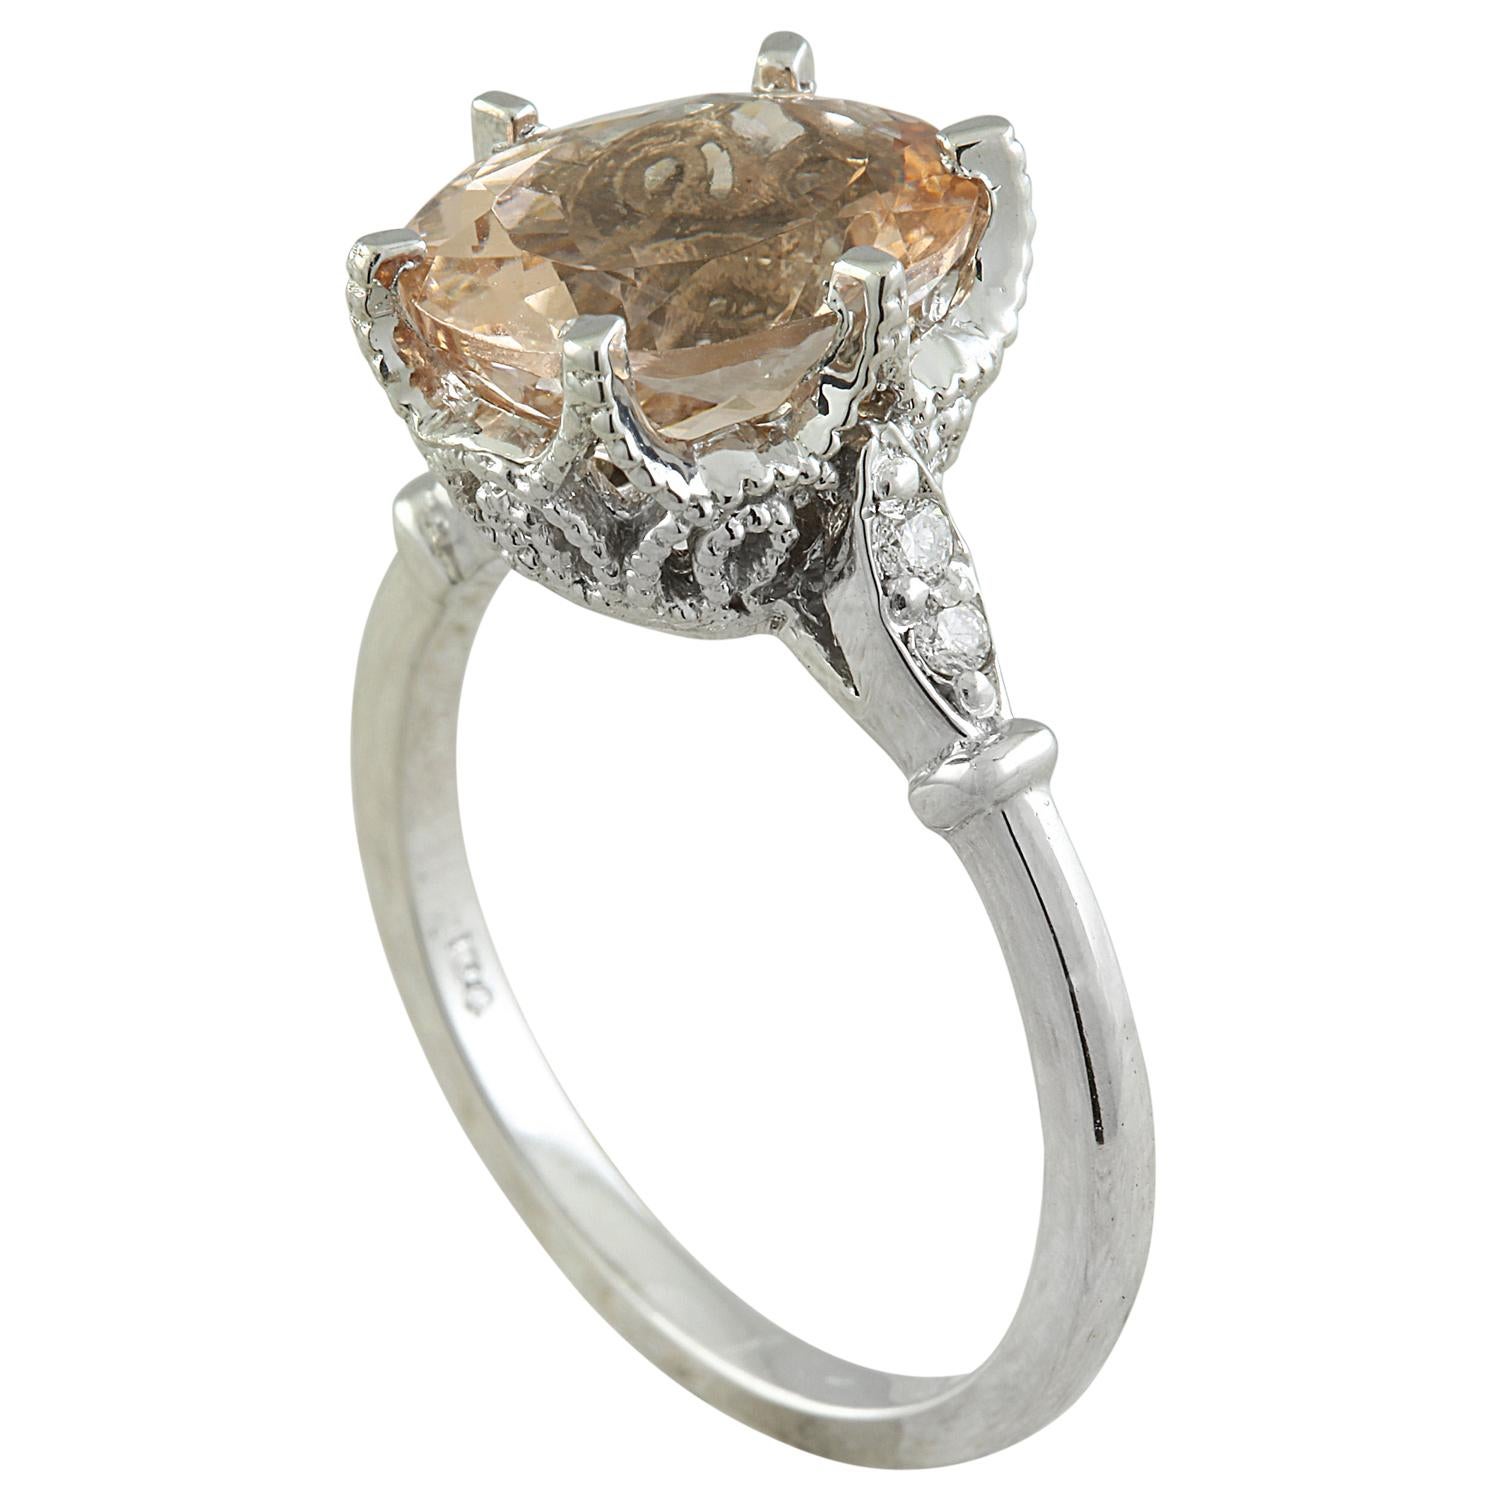 3.41 Carat Natural Morganite 14 Karat Solid White Gold Diamond Ring
Stamped: 14K 
Total Ring Weight: 4.2 Grams 
Morganite Weight: 3.26 Carat (11.00x9.00 Millimeters)  
Diamond Weight: 0.15 Carat (F-G Color, VS2-SI1 Clarity )
Quantity:4
Face